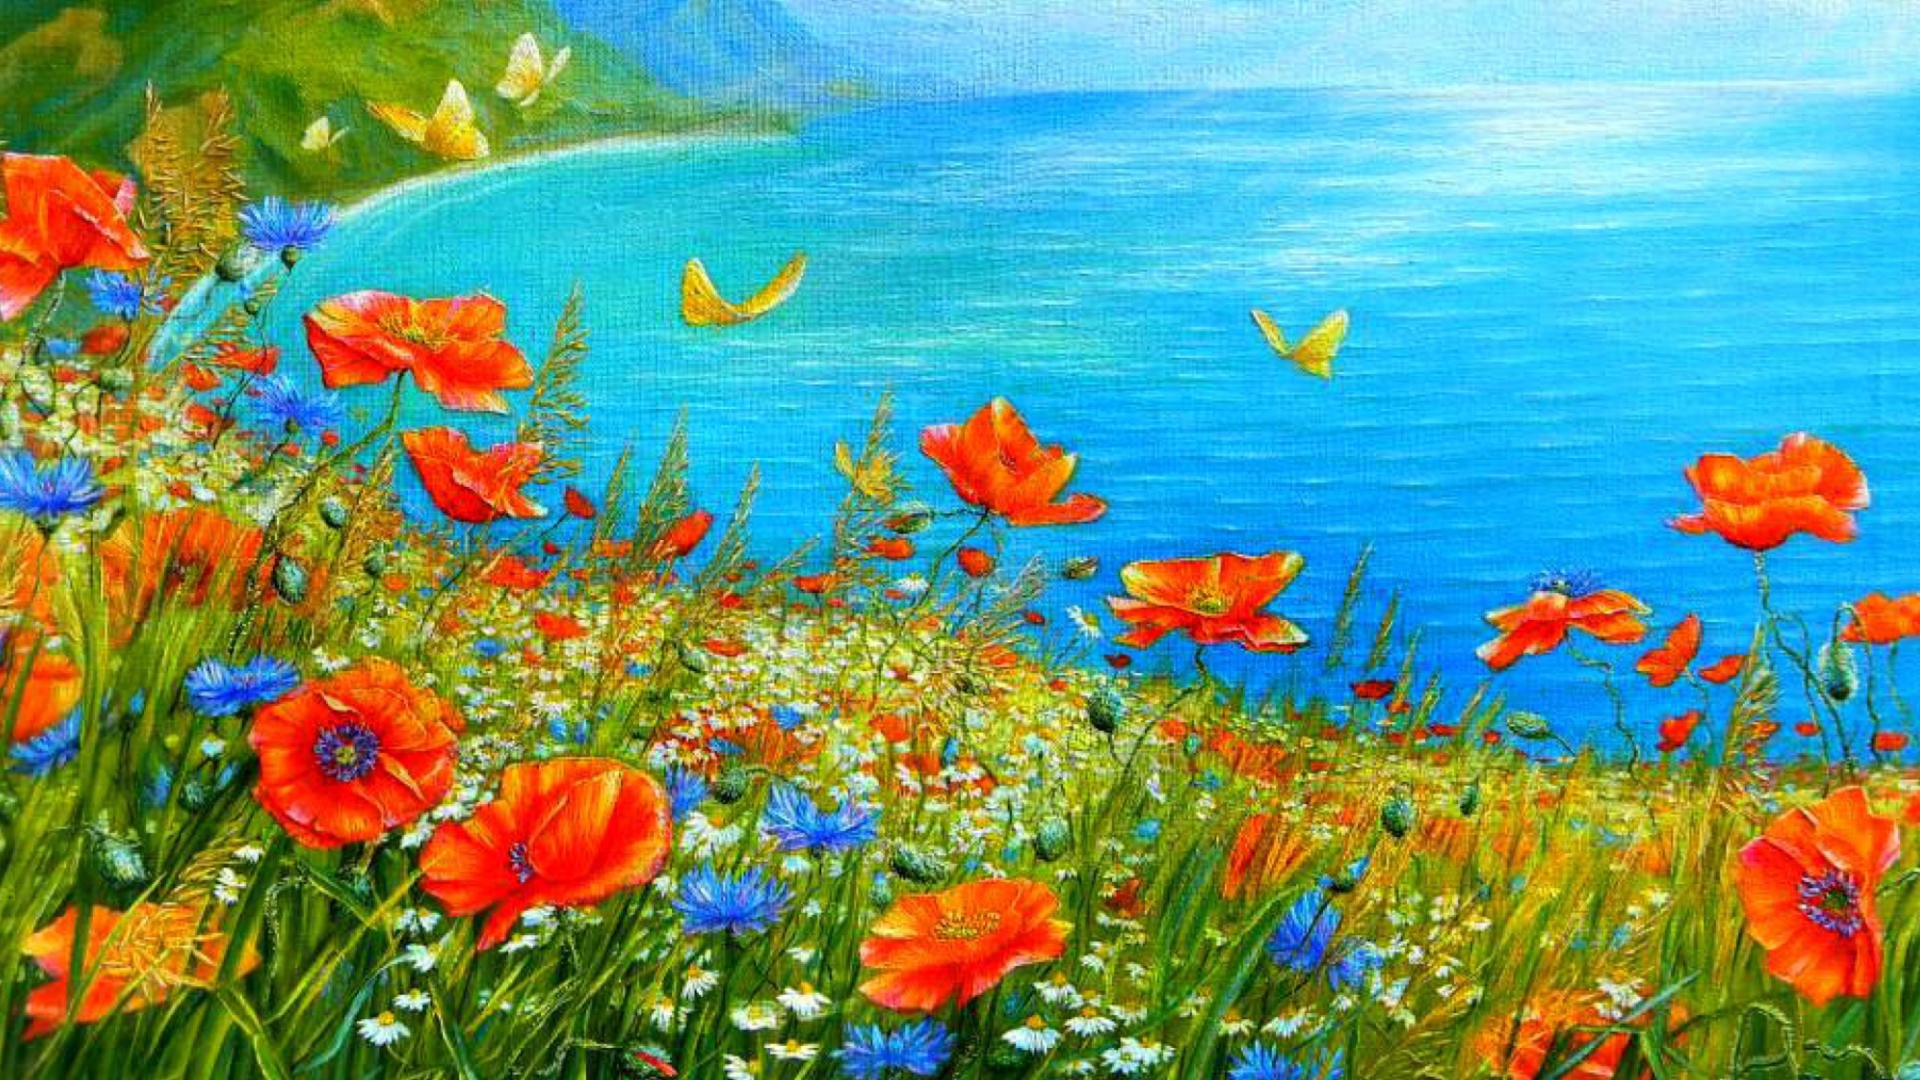 Summer Meadow By Sea Painting wallpaper 1920x1080